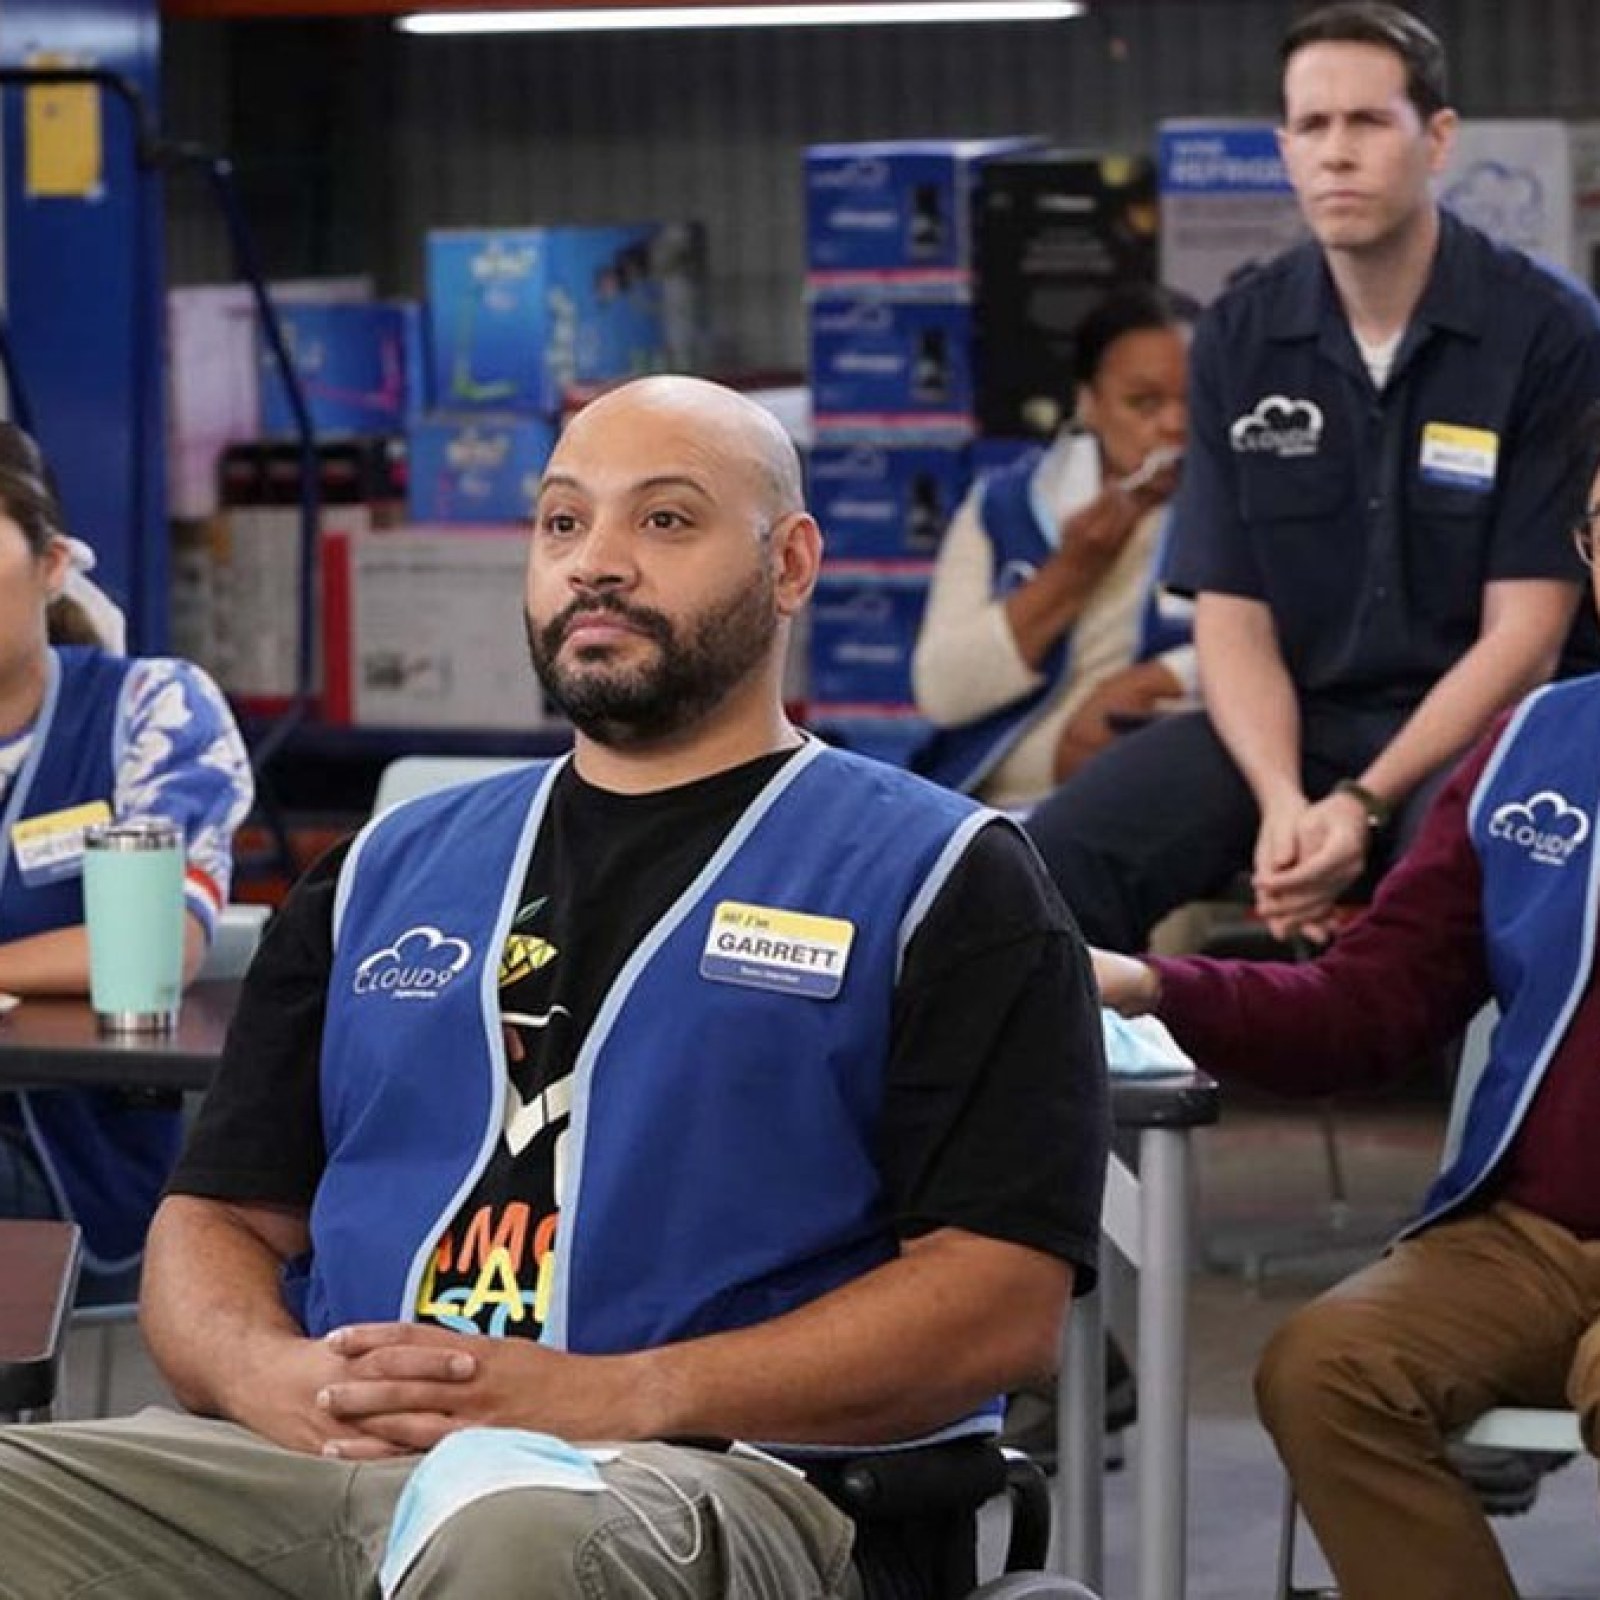 The Real Reason Superstore Was Canceled